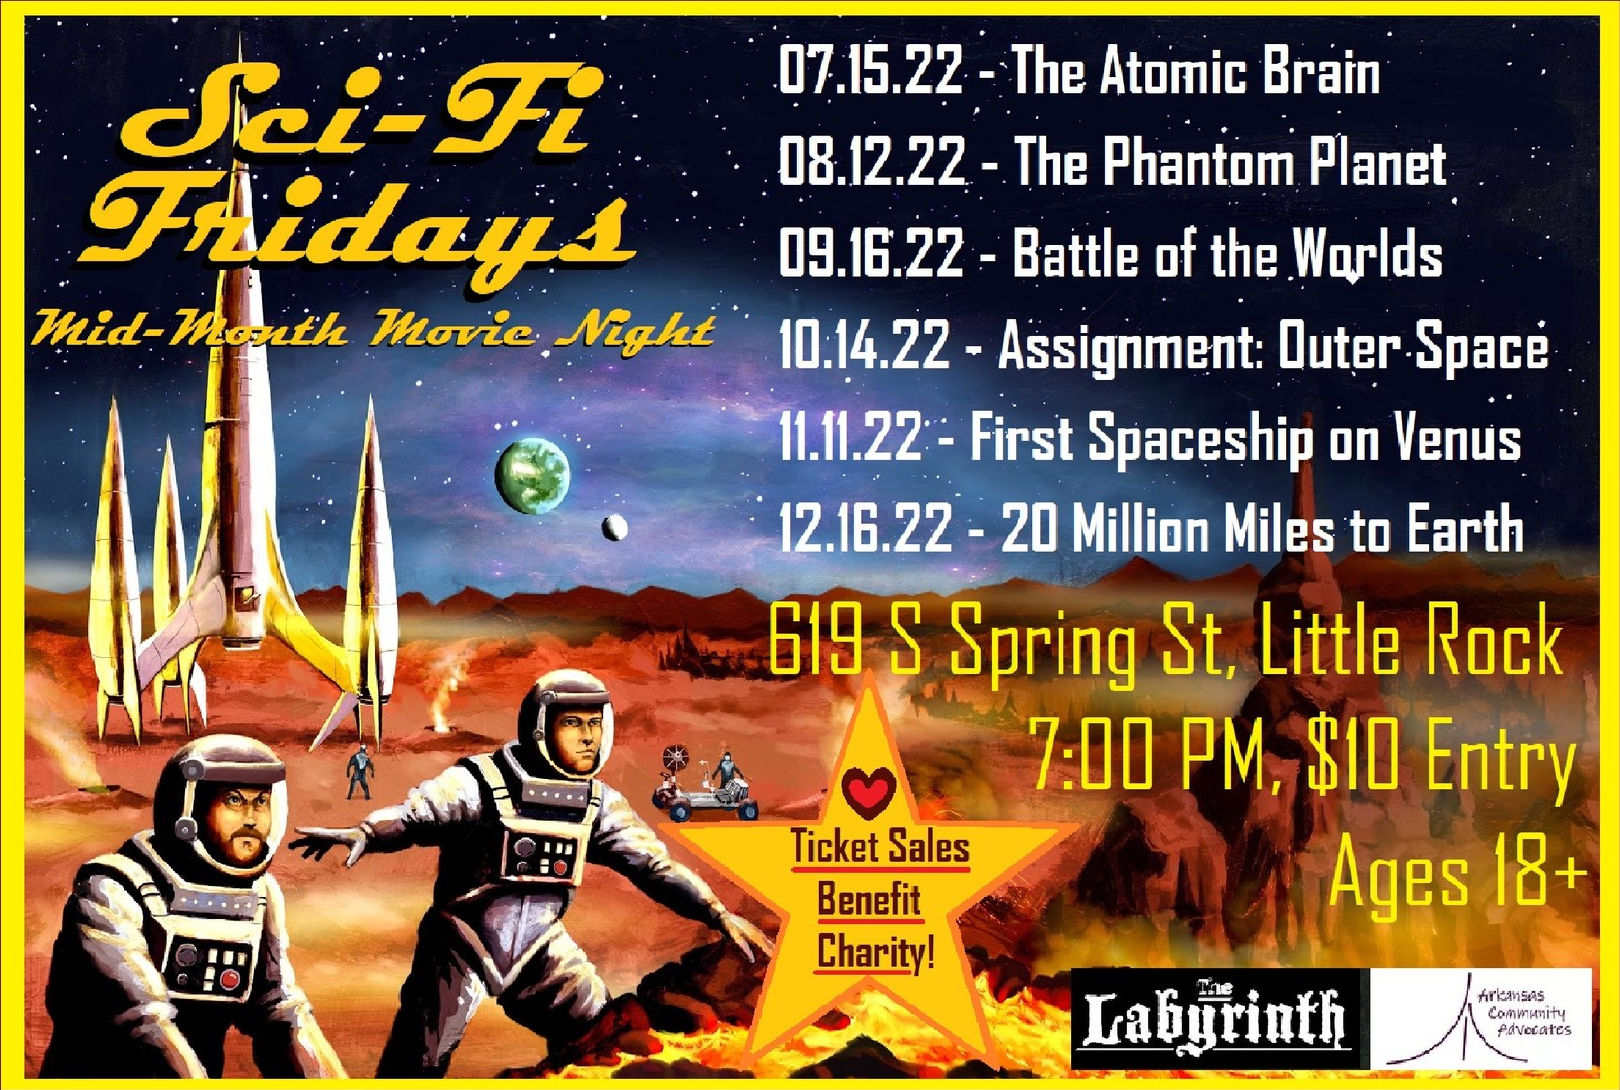 Flyer for Sci-Fi Fridays, Mid-Month Movie Night. This shows a picture of a couple of men in spacesuits on an alien planet, possibly Mars. The text says, &ldquo;Sci-Fi Fridays. Presenting Phantom Planet on Friday, August 12, 2022 at The Labyrinth, at 619 South Spring Street in downtown Little Rock, Arkansas. Starts at 7:00 PM, entry fee is $10. Ticket sales benefit Arkansas Community Advocates.